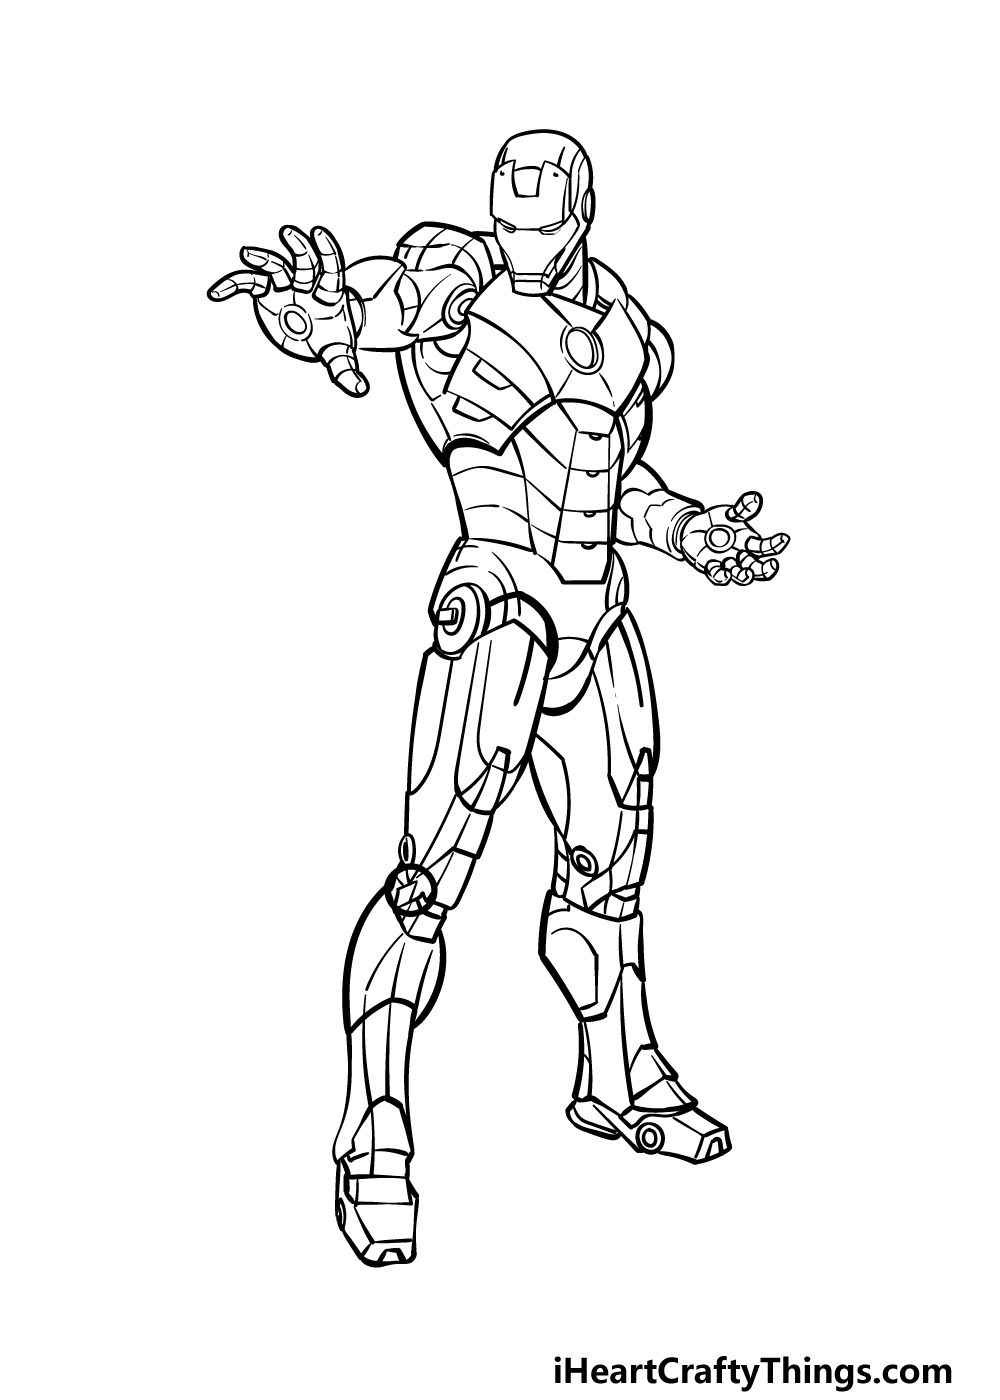 Easy iron man drawing. Step by Step. You must know. - Draw Easily - Medium-saigonsouth.com.vn